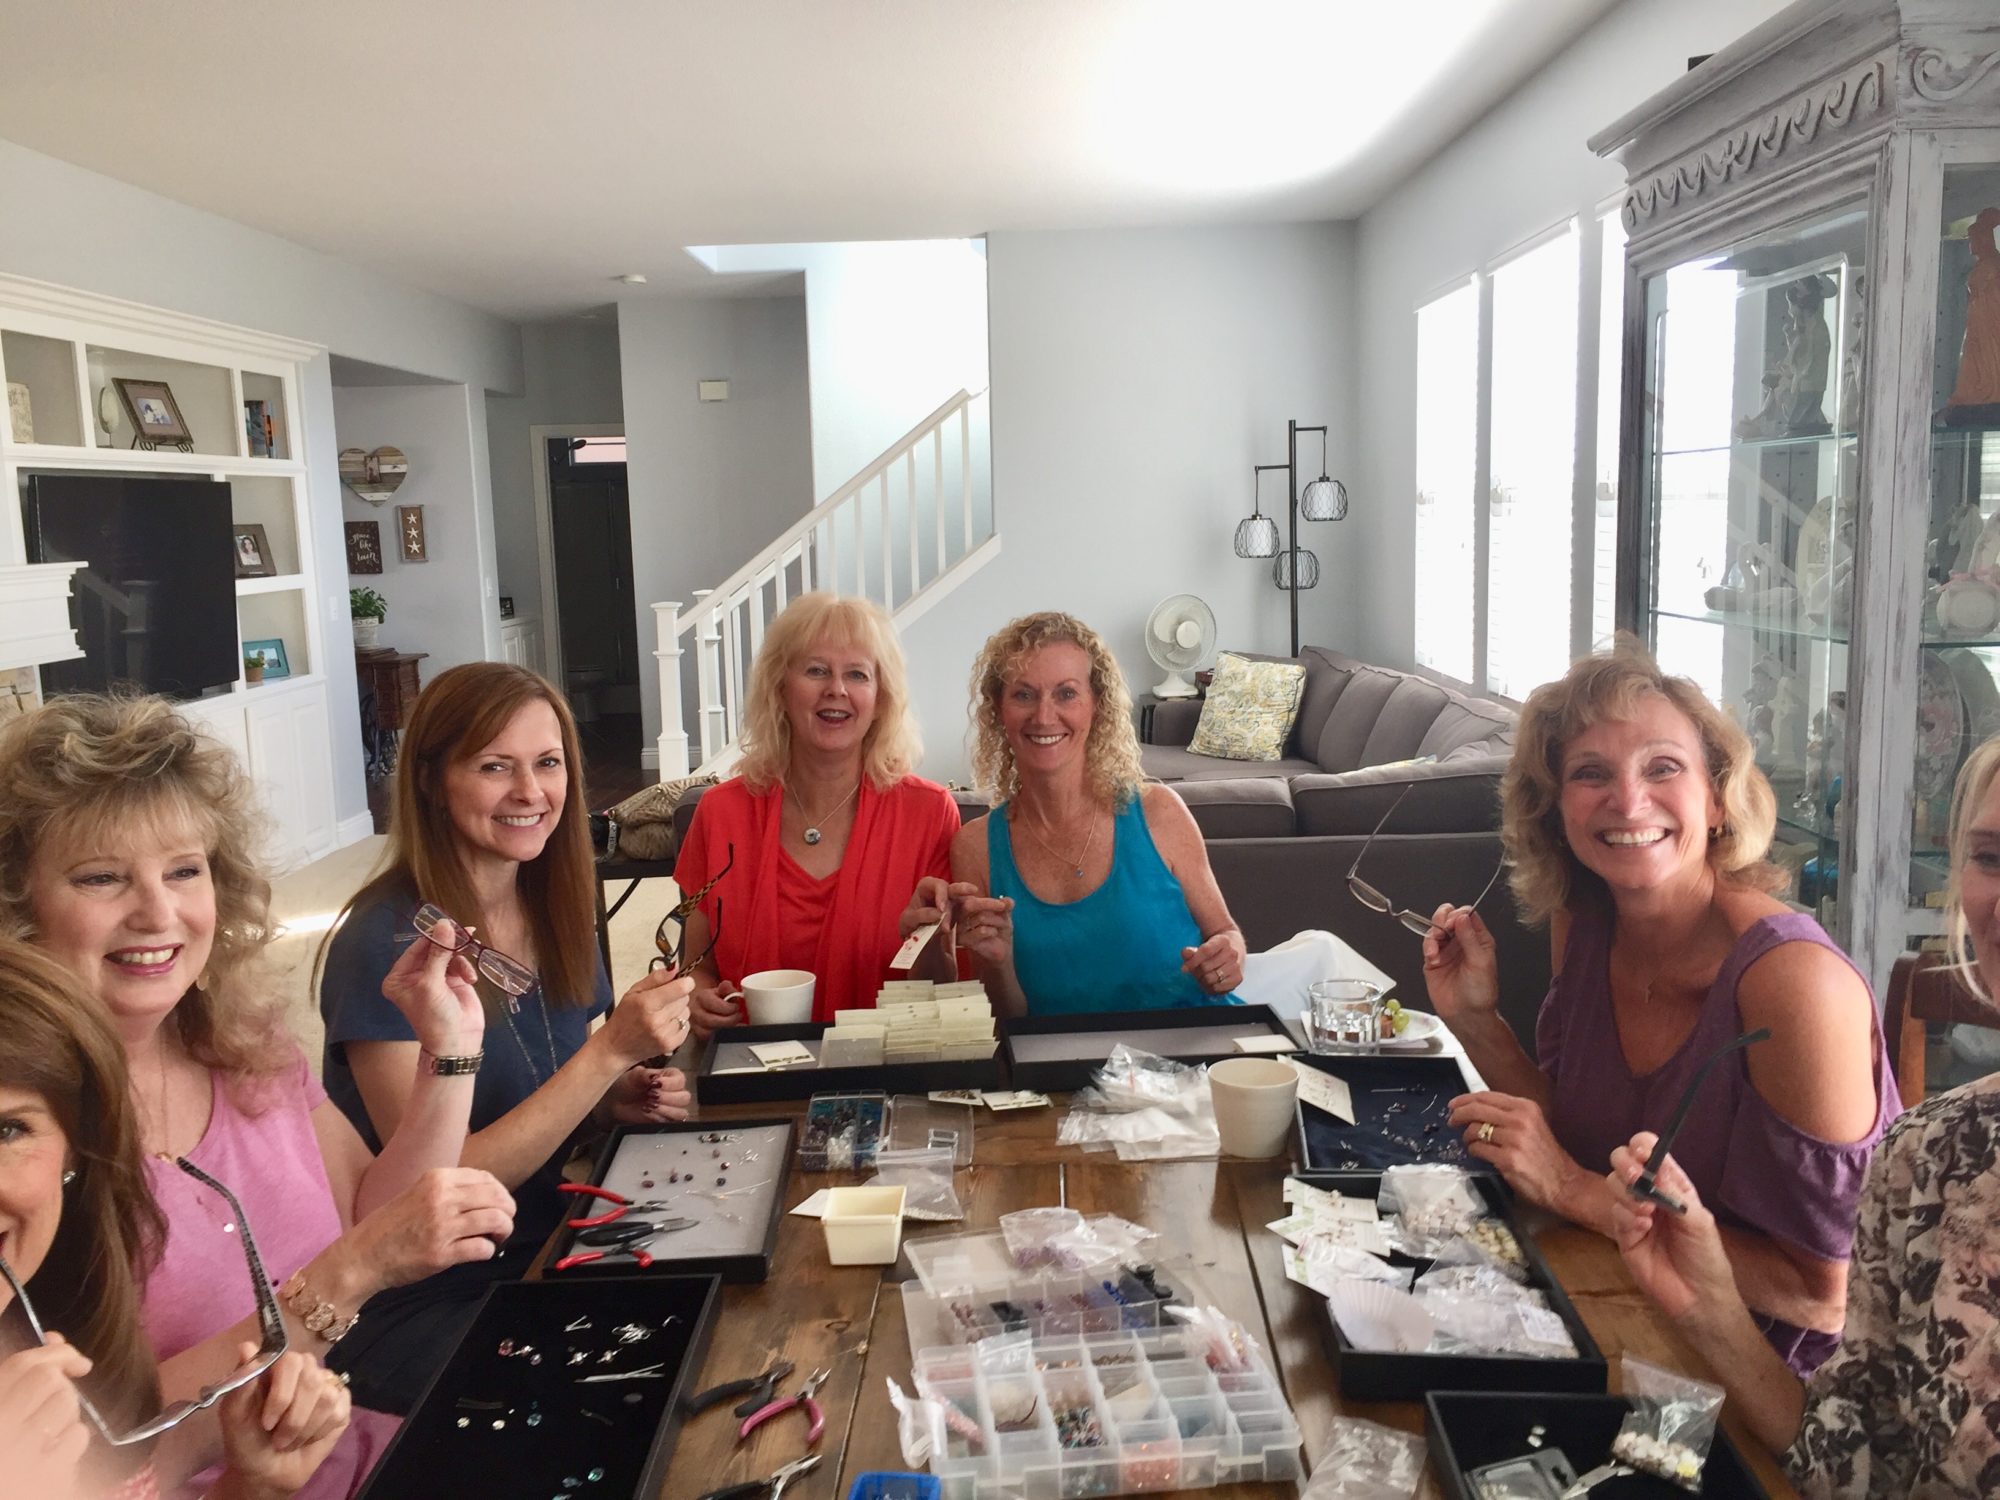 Jewelry Making to Support Adoption - Home for Good Foundation - Tues PM